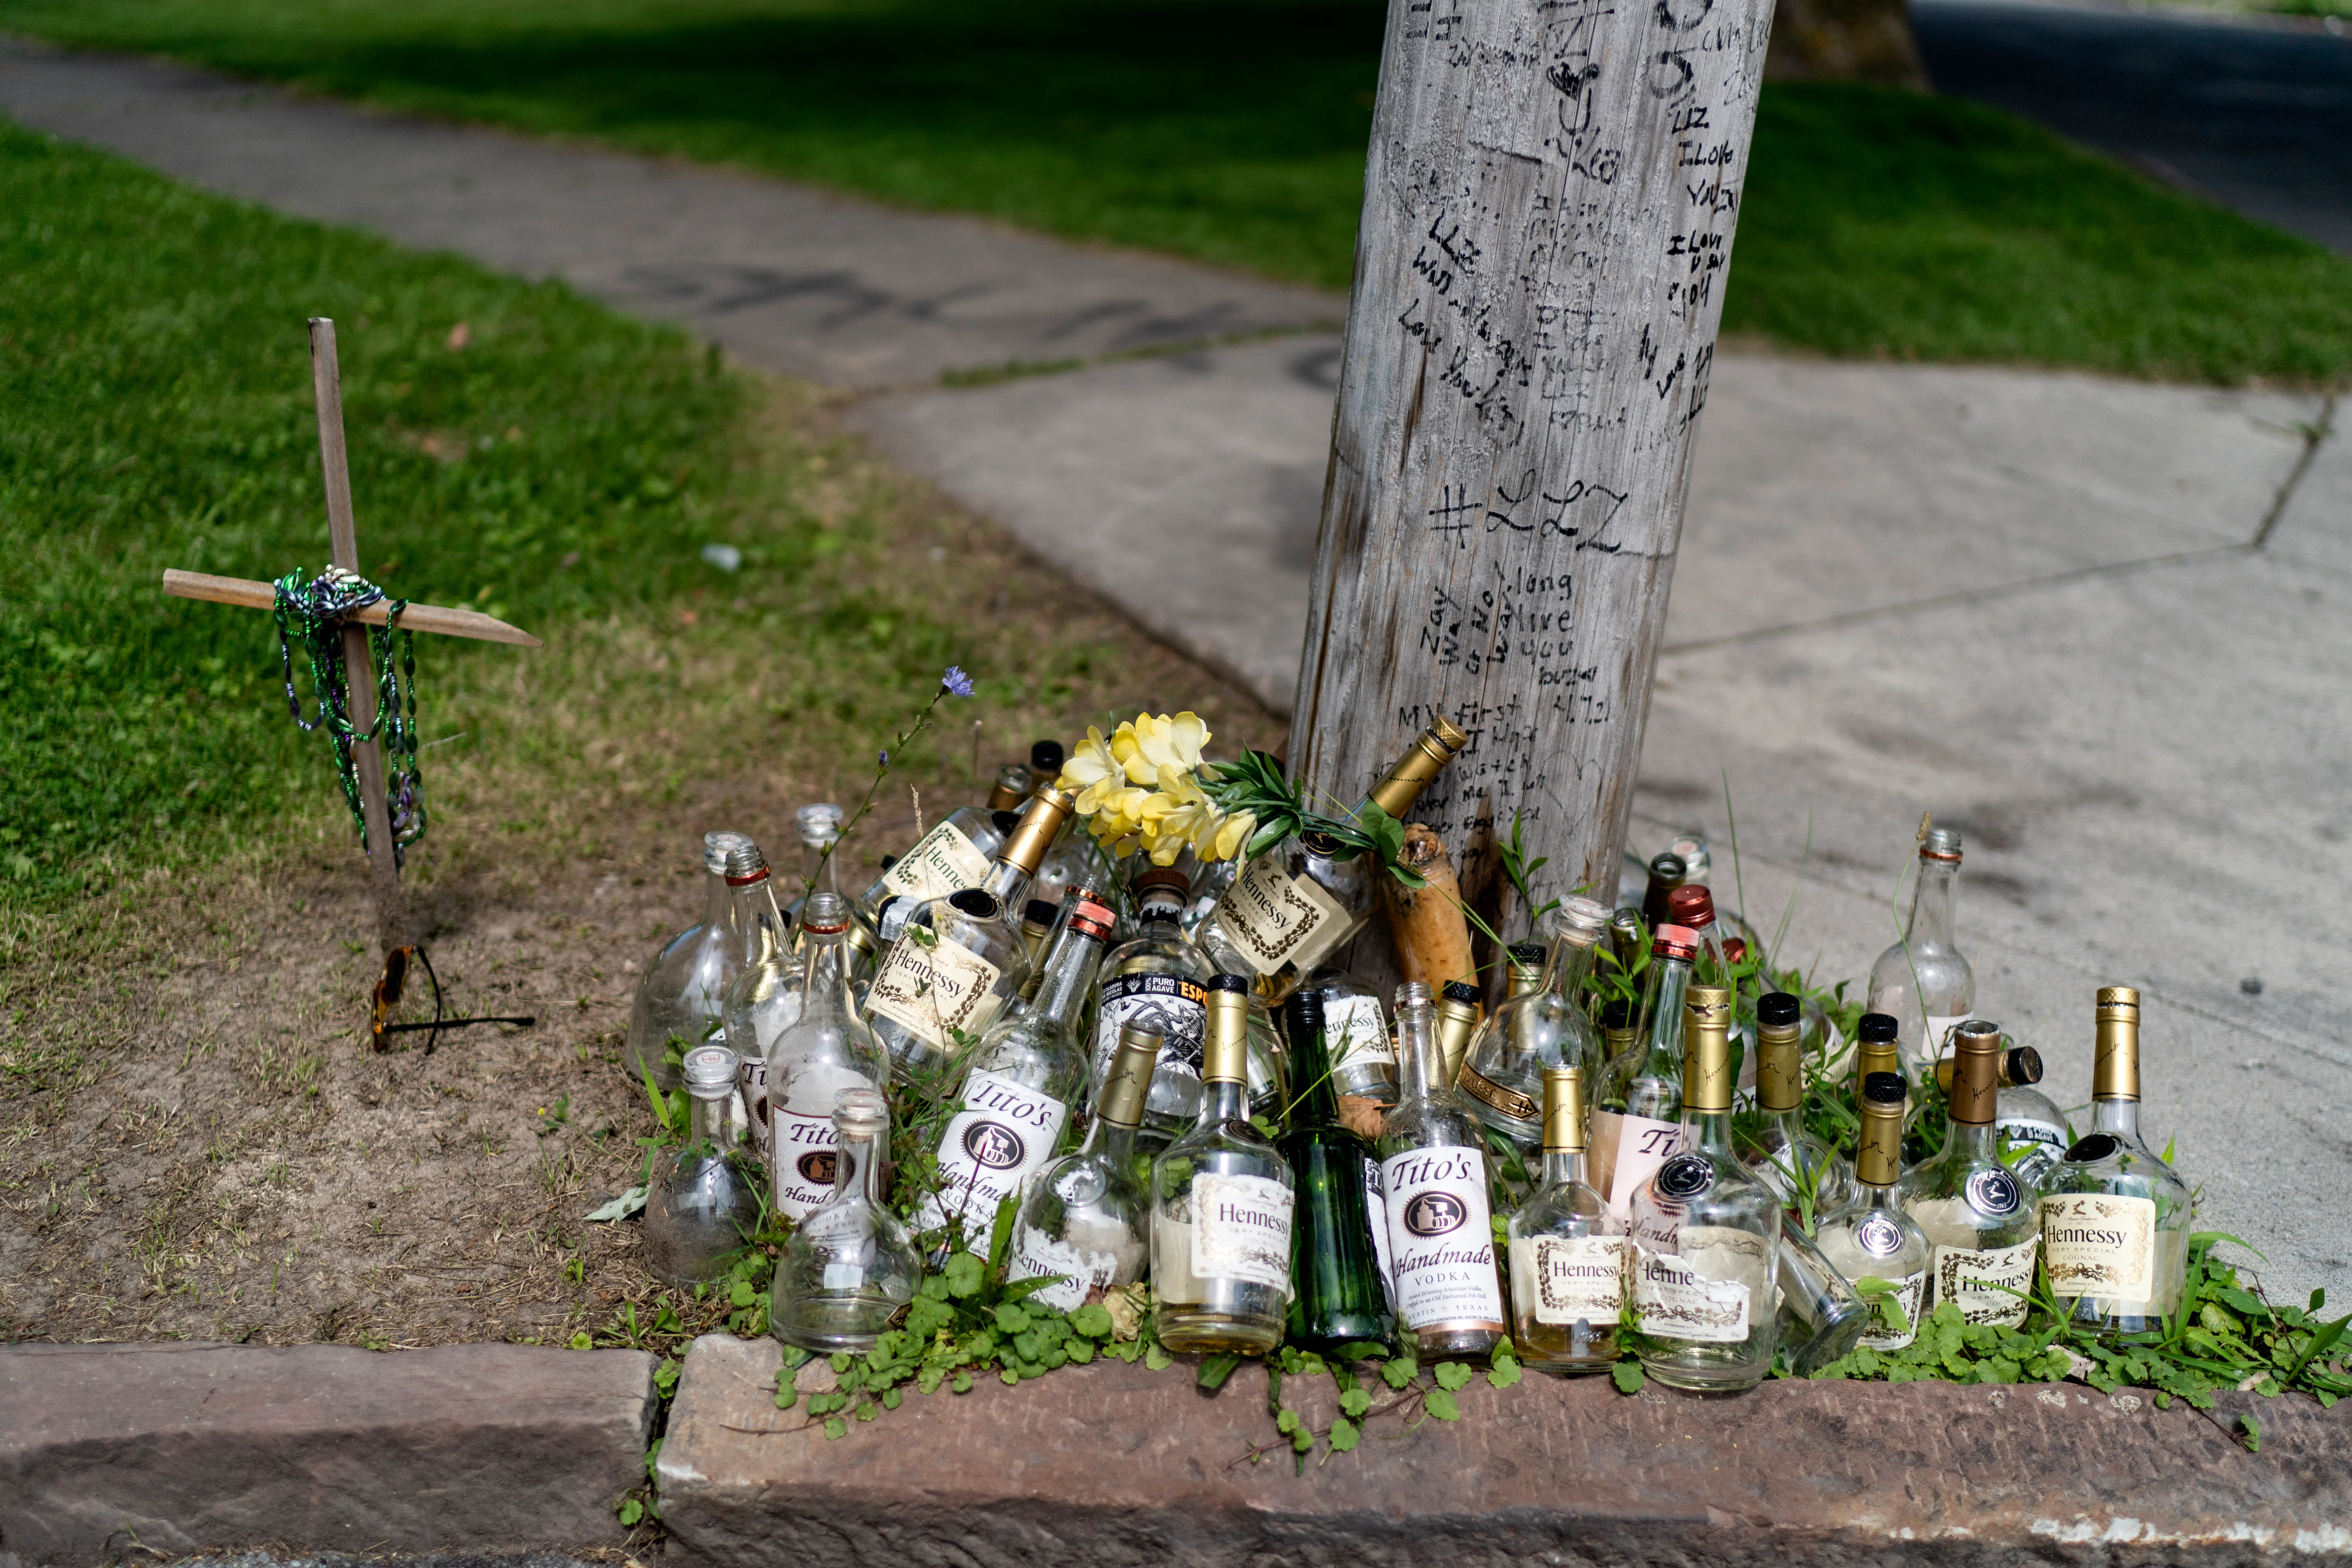 A memorial made of a pile of bottles.